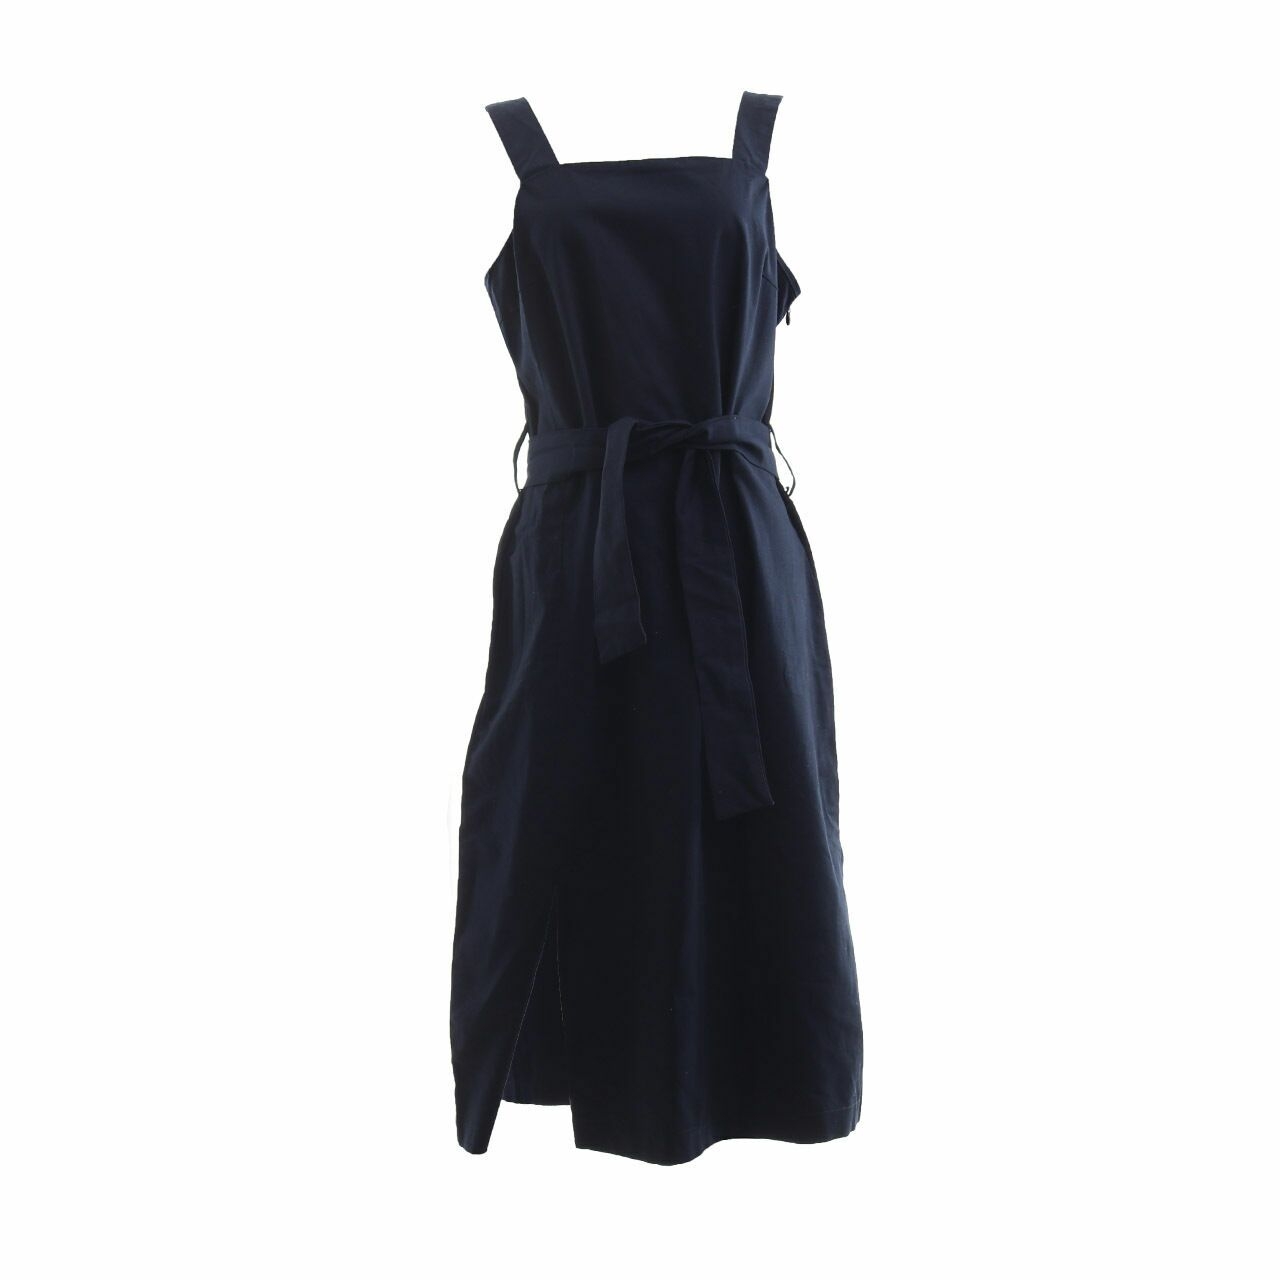 Schoncouture Navy With Slit Mini Dress